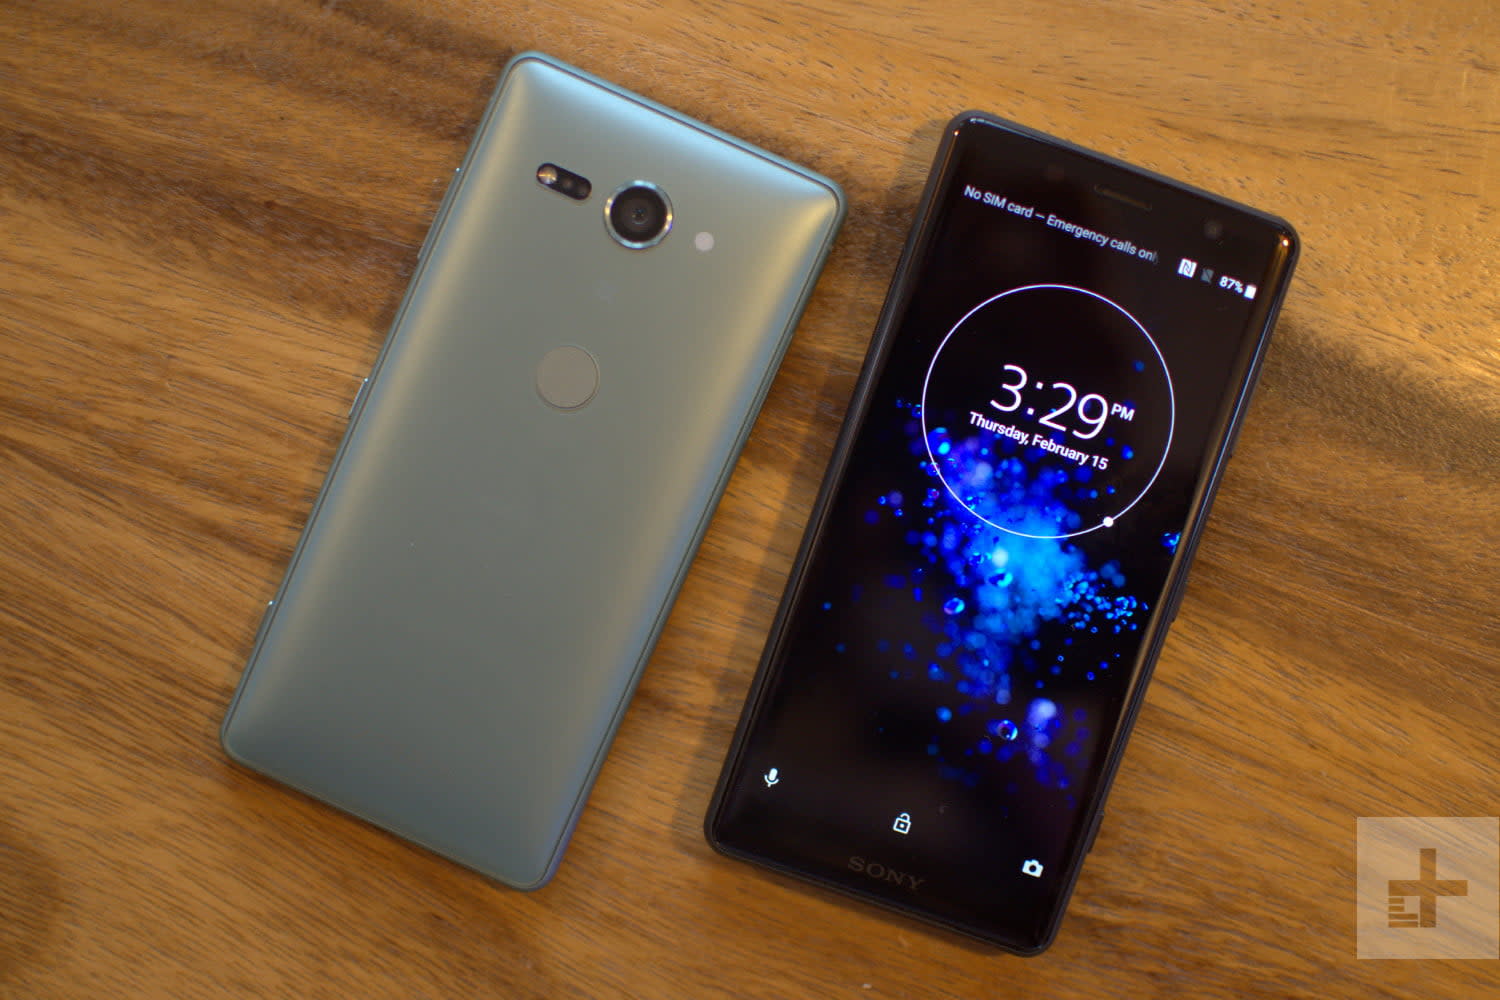 Sony Xperia XZ3 vs Sony Xperia XZ4 Compact vs Sony Xperia Z3 Compact comparison on basis of price, specifications, features, performance, display & camera, storage & battery, reviews & ratings and much more with full phone specifications at Gadgets Now.